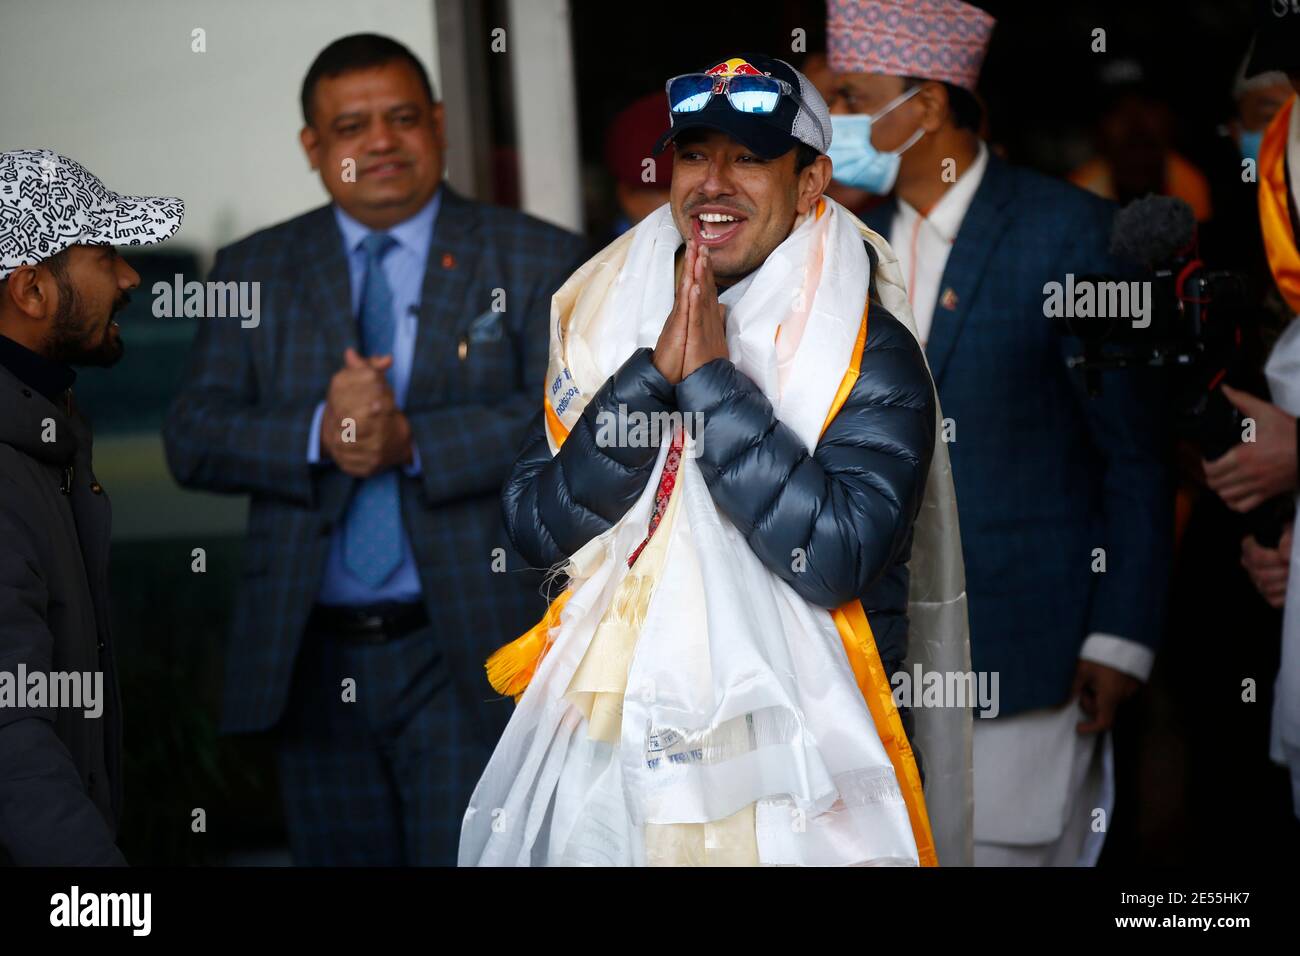 Kathmandu, Nepal. 26th Jan, 2021. Nepalese climber Nirmal Purja, who along with his team recently made history by scaling the K2 summit in the winter season, gestures upon his arrival to Tribhuvan International Airport in Kathmandu, Nepal on Tuesday, January 26, 2021. Credit: Skanda Gautam/ZUMA Wire/Alamy Live News Stock Photo